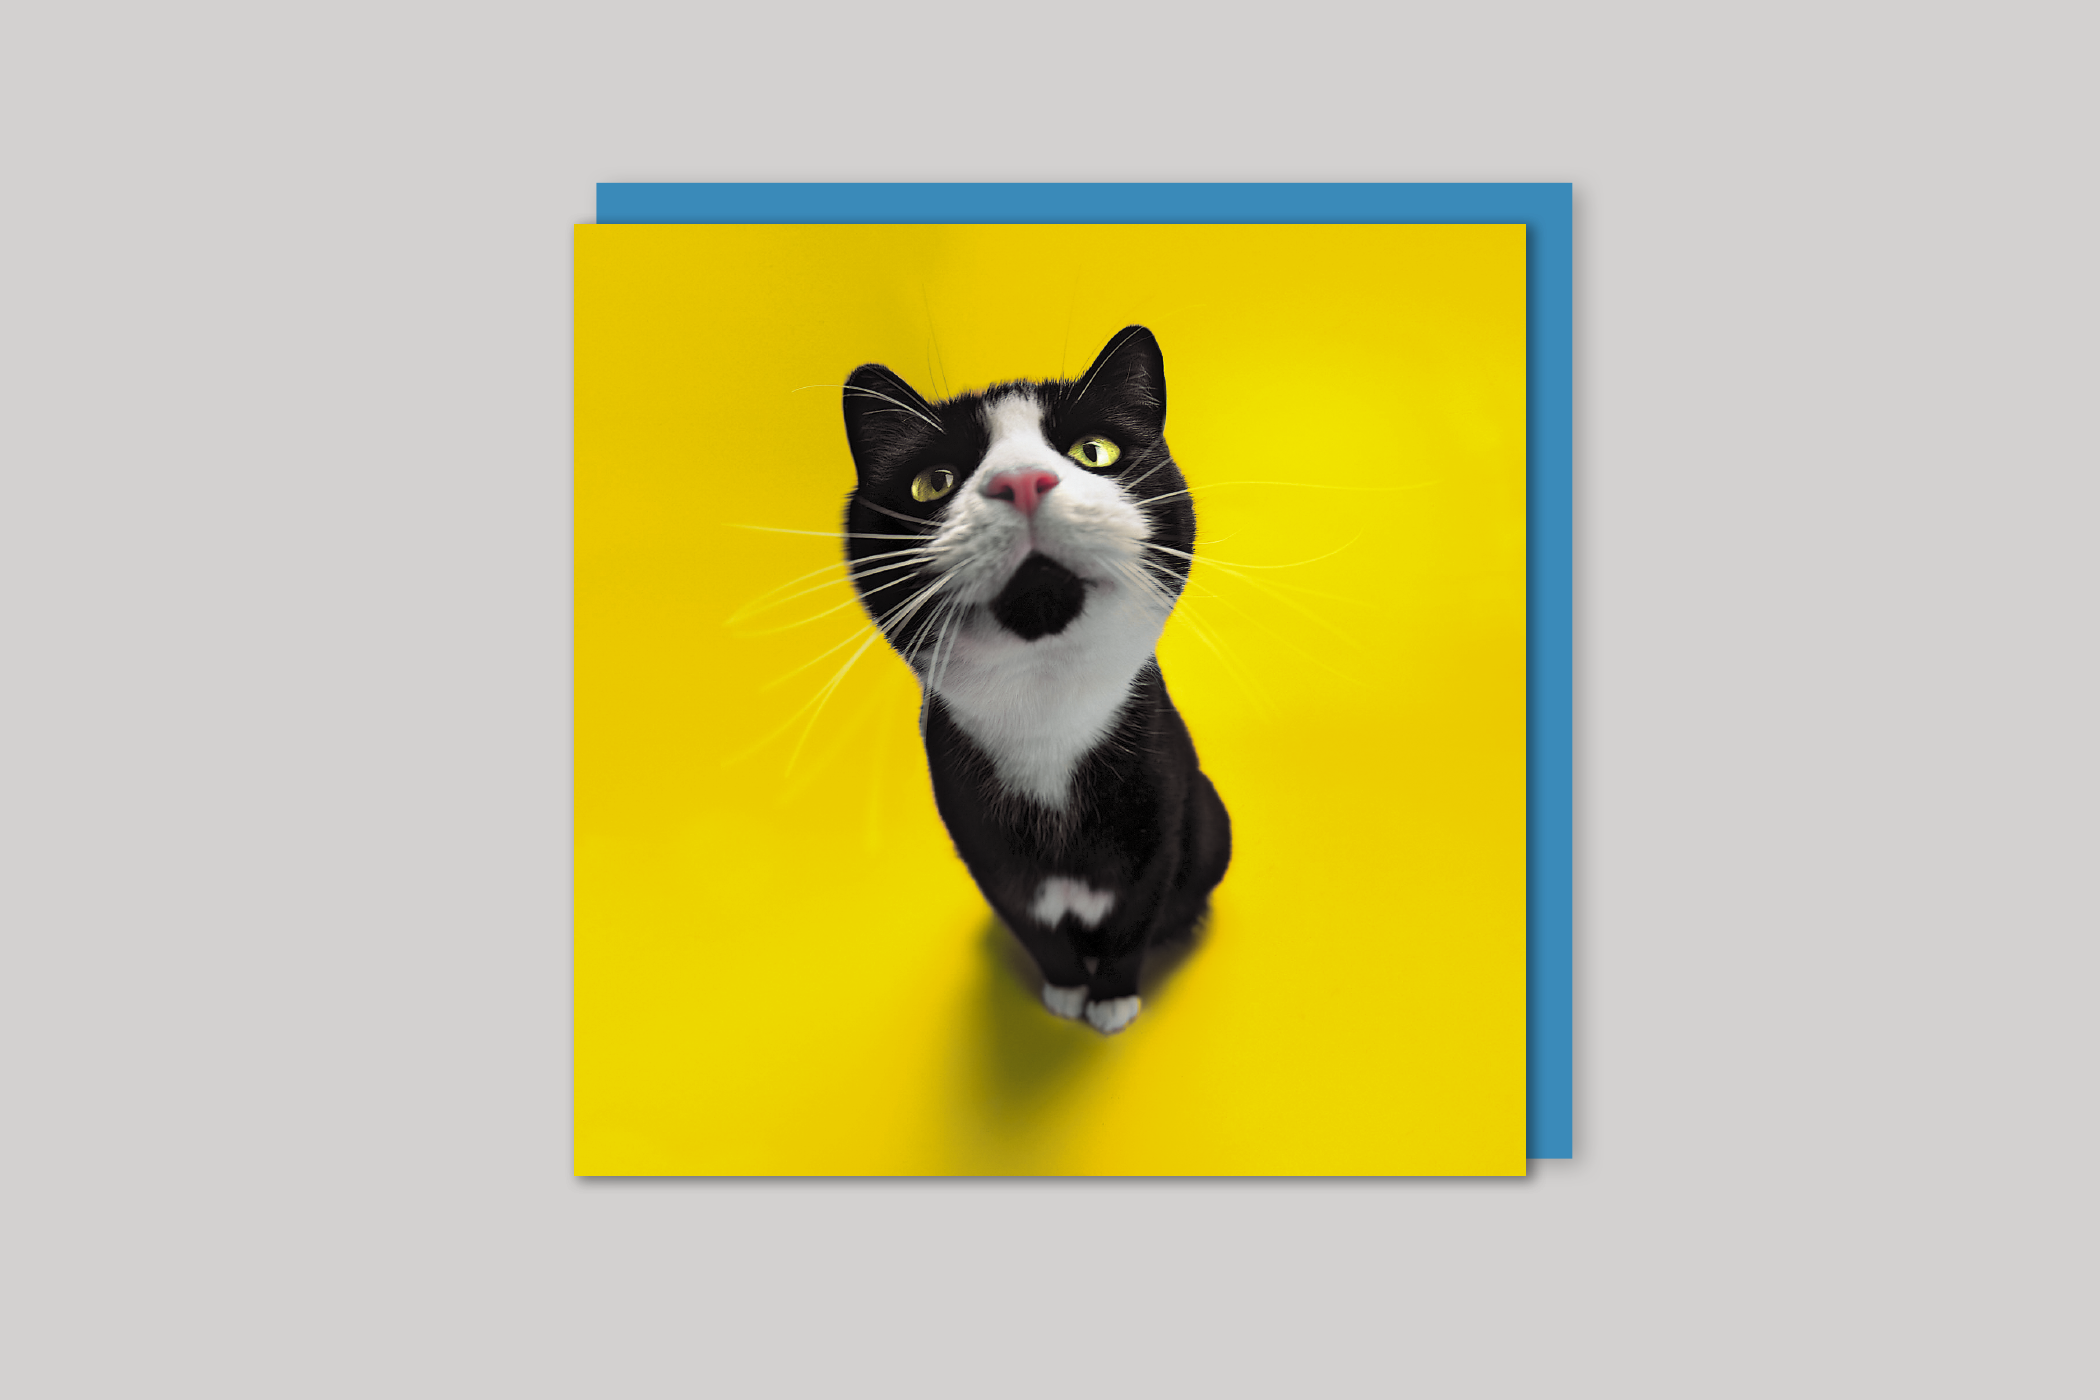 Meow! from Wildthings range of greeting cards by Icon, back page.